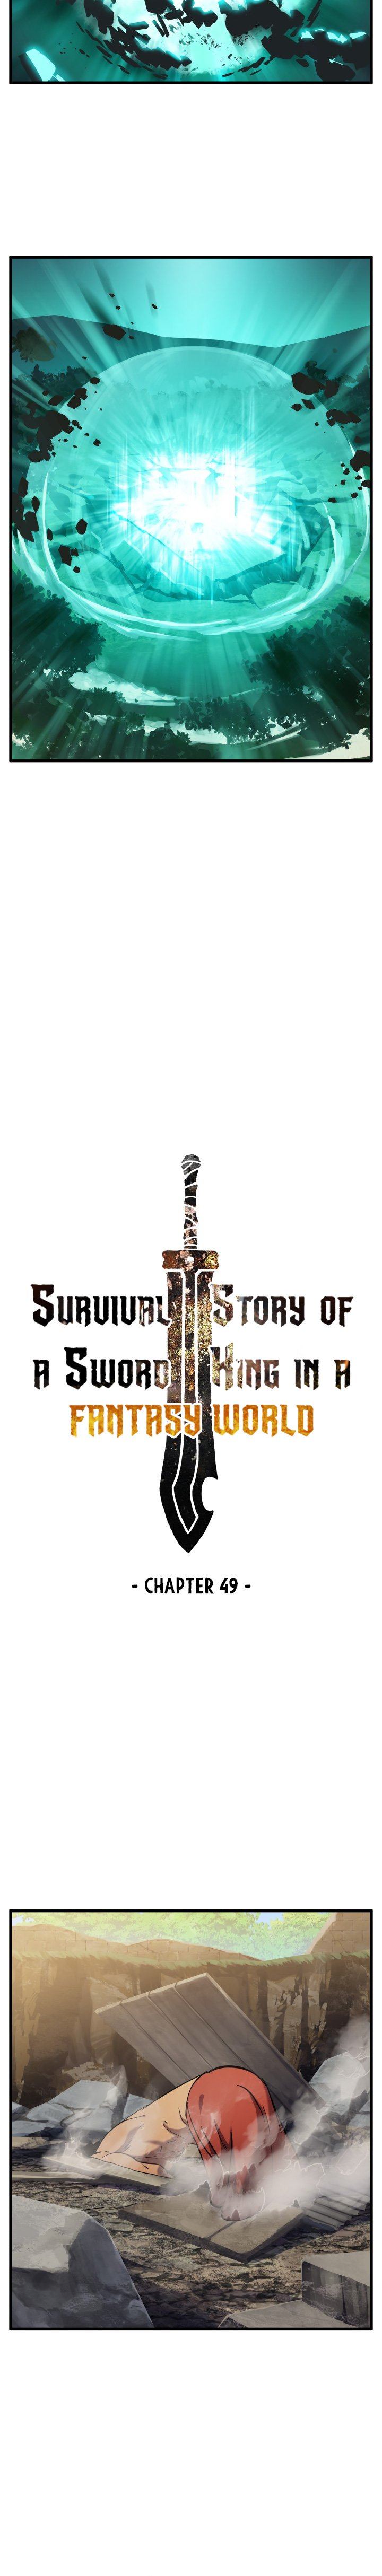 survival_story_of_a_sword_king_in_a_fantasy_world_49_8